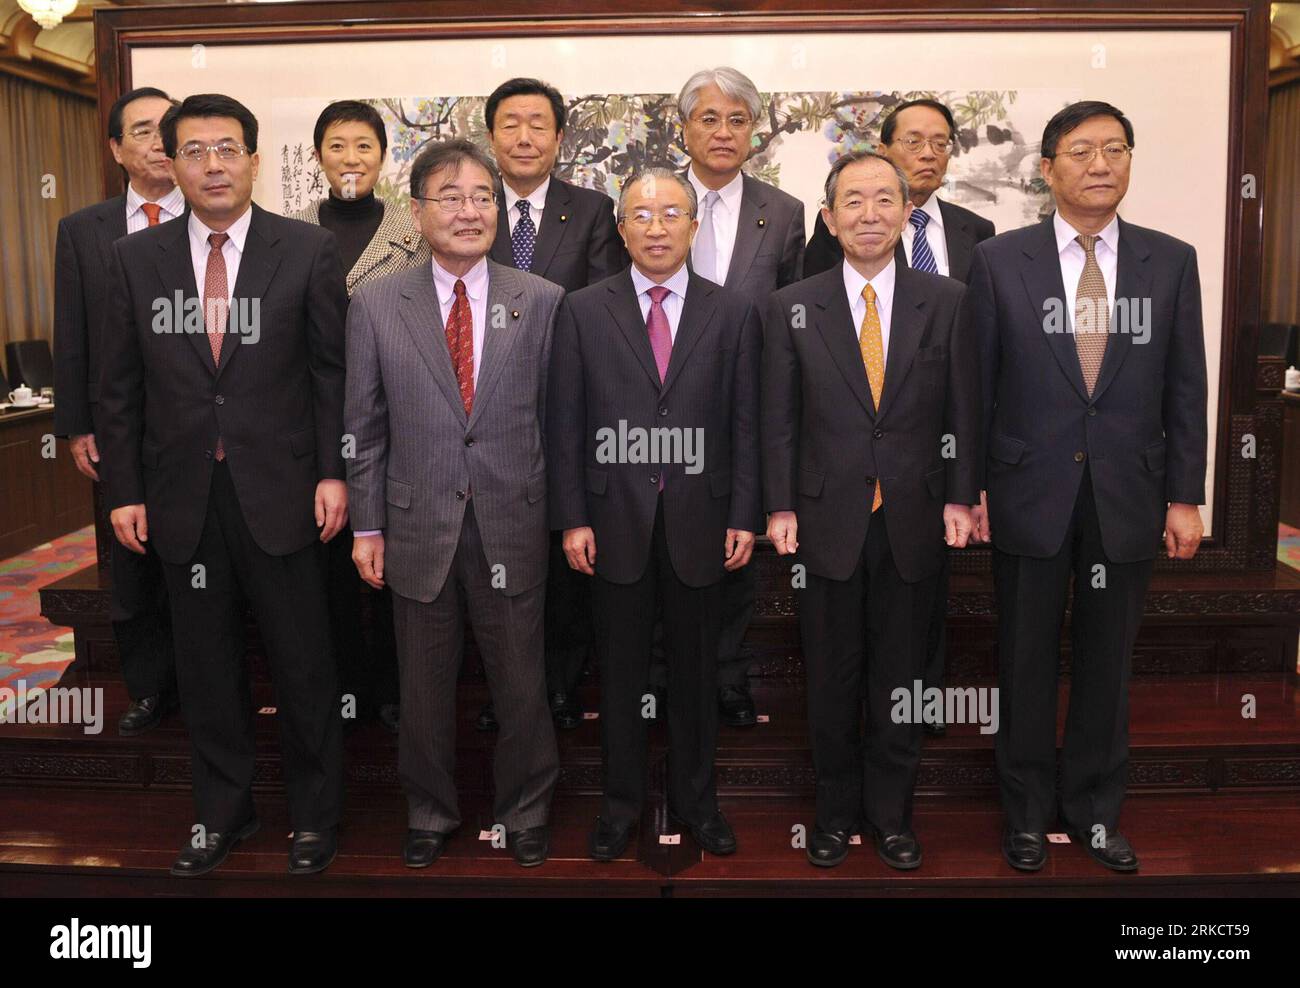 Bildnummer: 54802098  Datum: 11.01.2011  Copyright: imago/Xinhua (110111) -- BEIJING, Jan. 11, 2011 (Xinhua) -- Chinese State Councilor Dai Bingguo (C front) poses for a group photo with members of the Japanese delegation headed by Koichi Kato, chairman of the Japan-China Friendship Association and the former secretary general of the Japanese Liberal Democratic Party (LDP), in Beijing, capital of China, Jan. 11, 2011. (Xinhua/Huang Jingwen) (mcg) CHINA-BEIJING-DAI BINGGUO-JAPANESE DELEGATION-MEETING (CN) PUBLICATIONxNOTxINxCHN People Politik kbdig xmk 2011 quer     Bildnummer 54802098 Date 11 Stock Photo